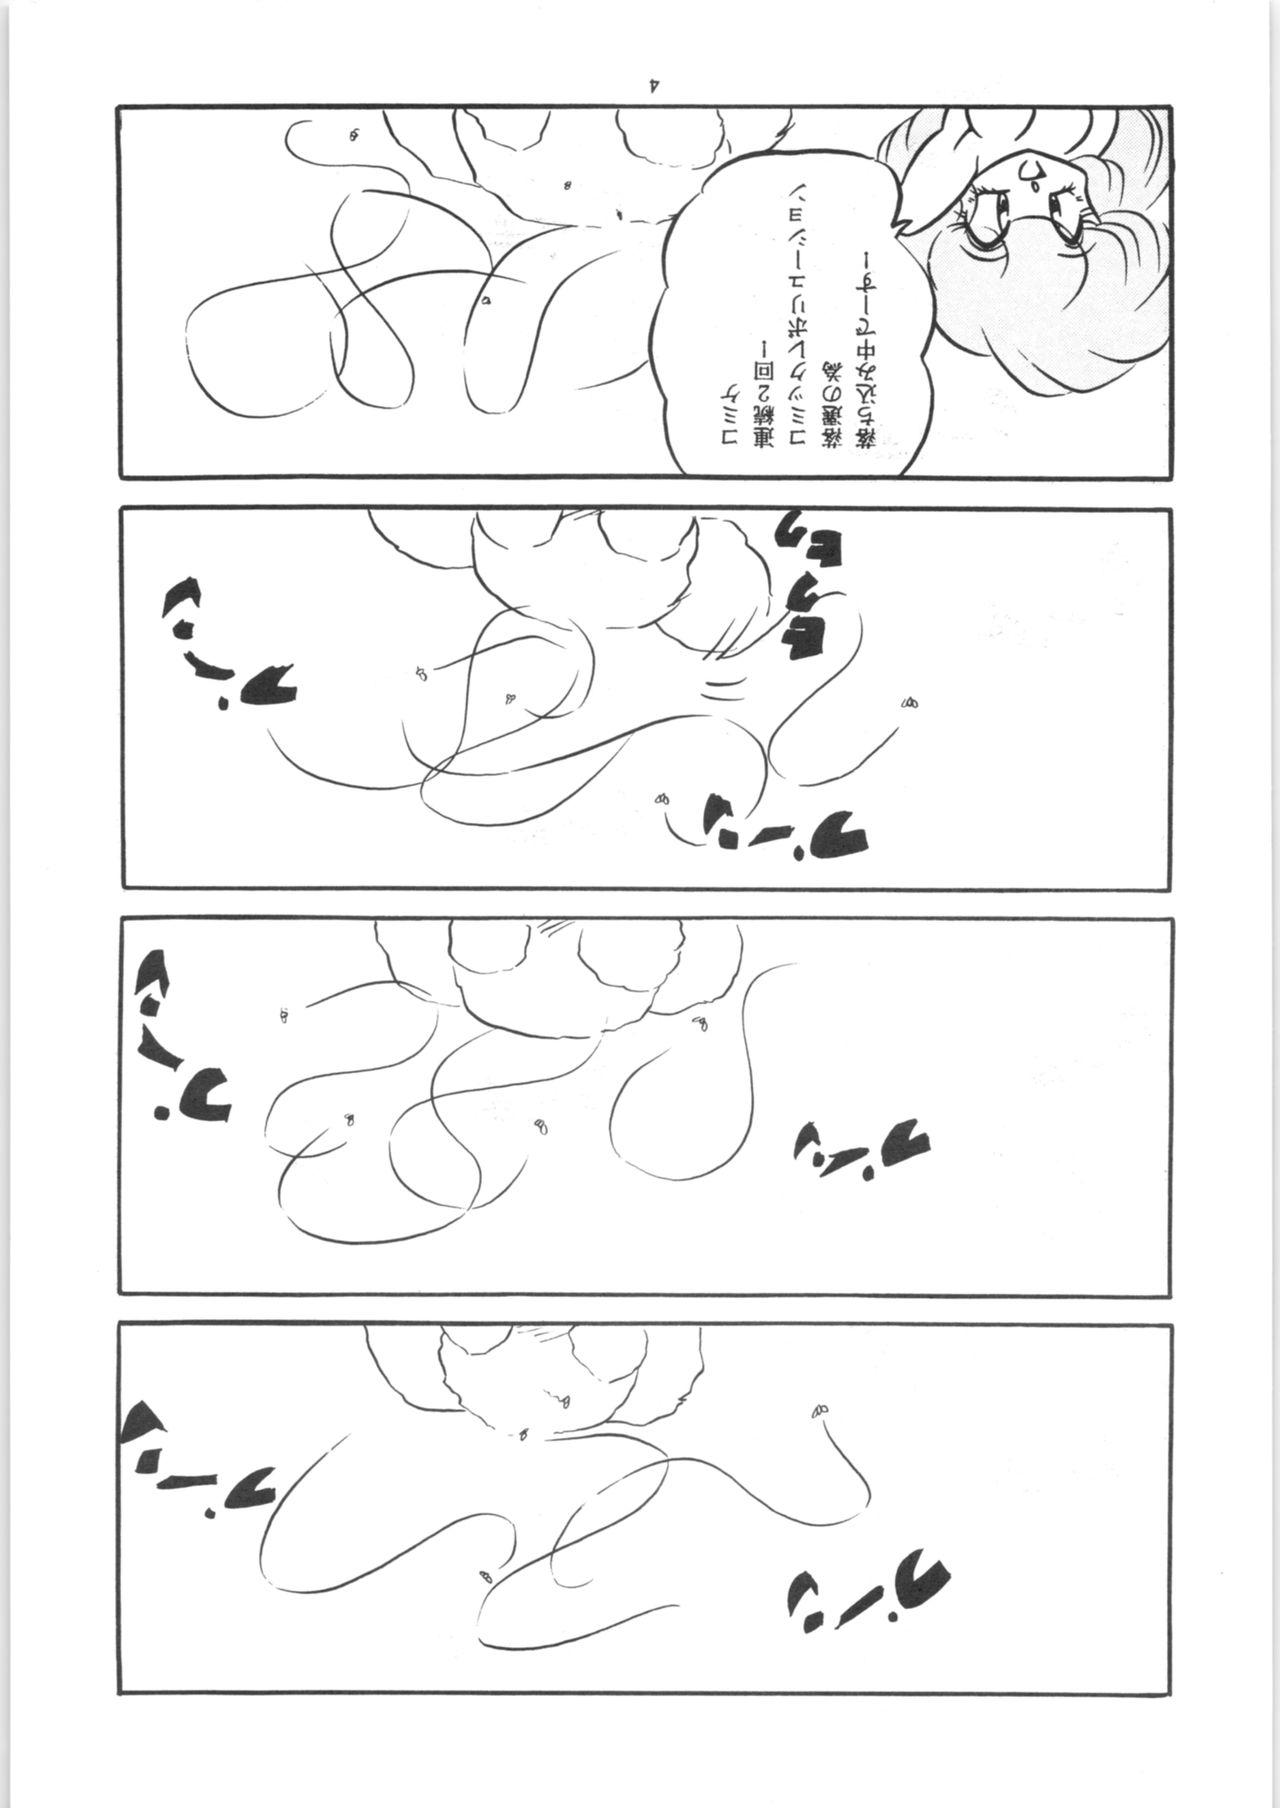 Hard Fuck C-COMPANY SPECIAL STAGE 18 - Ranma 12 Idol project Webcams - Page 4